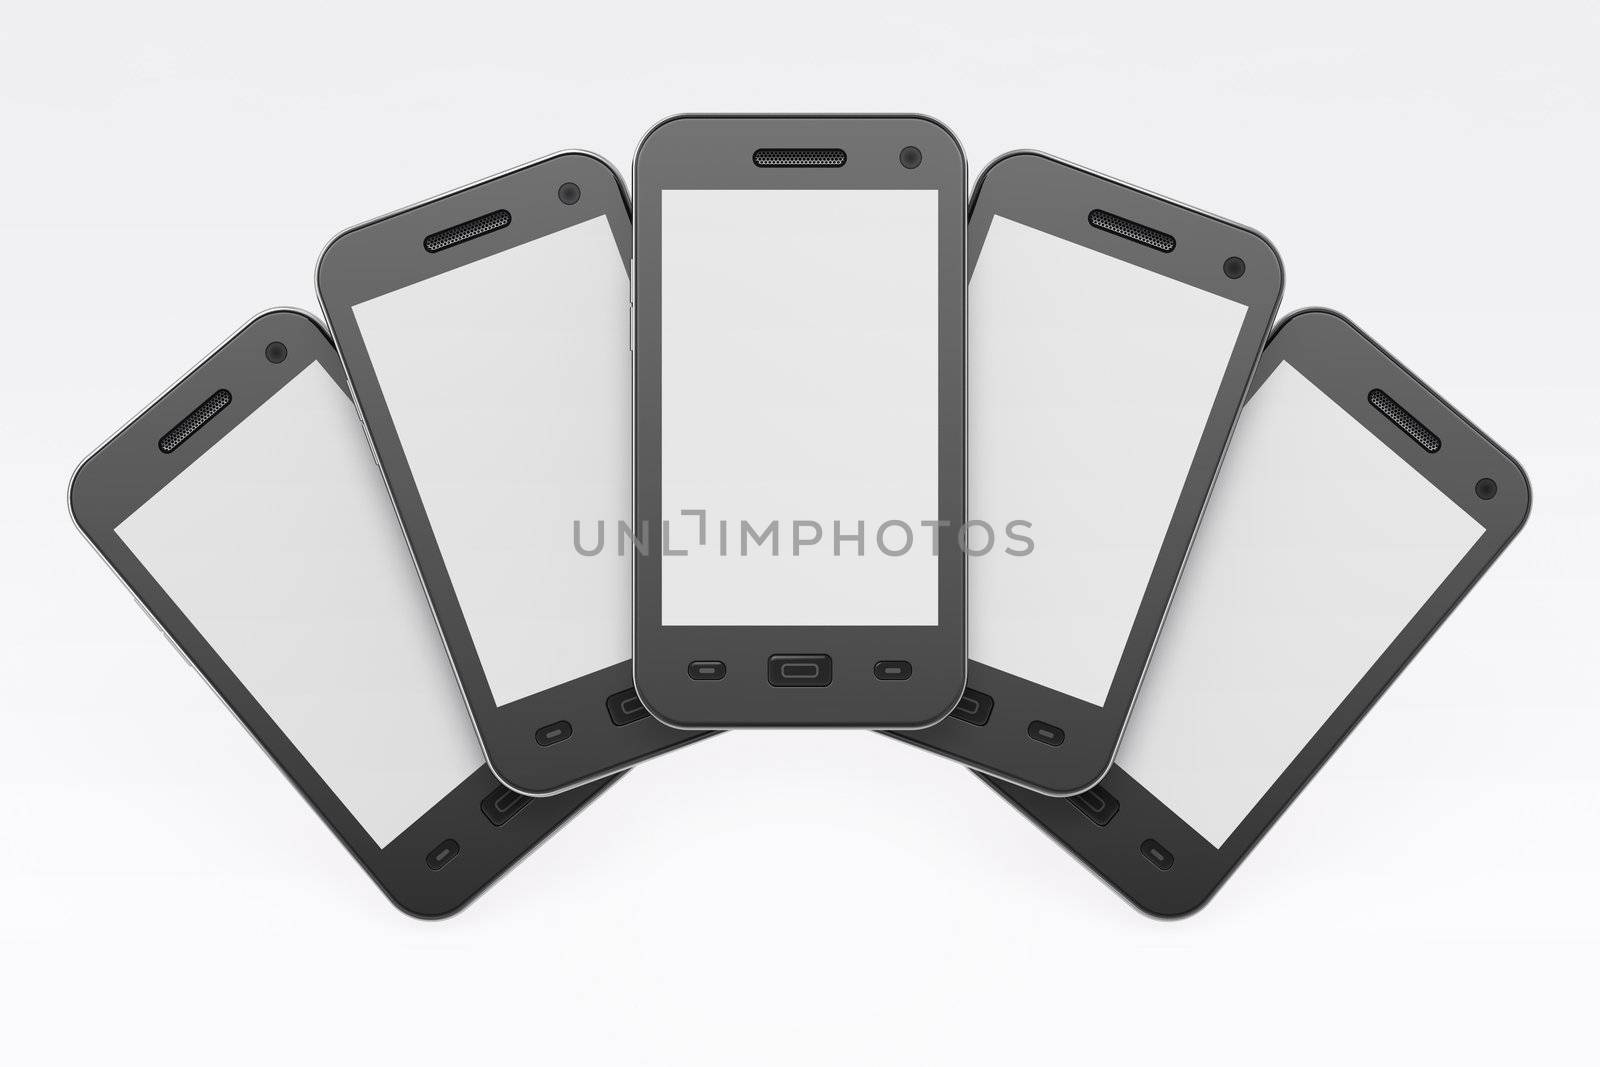 Black smart phones on white background, 3d render. Just place your images on the screens!